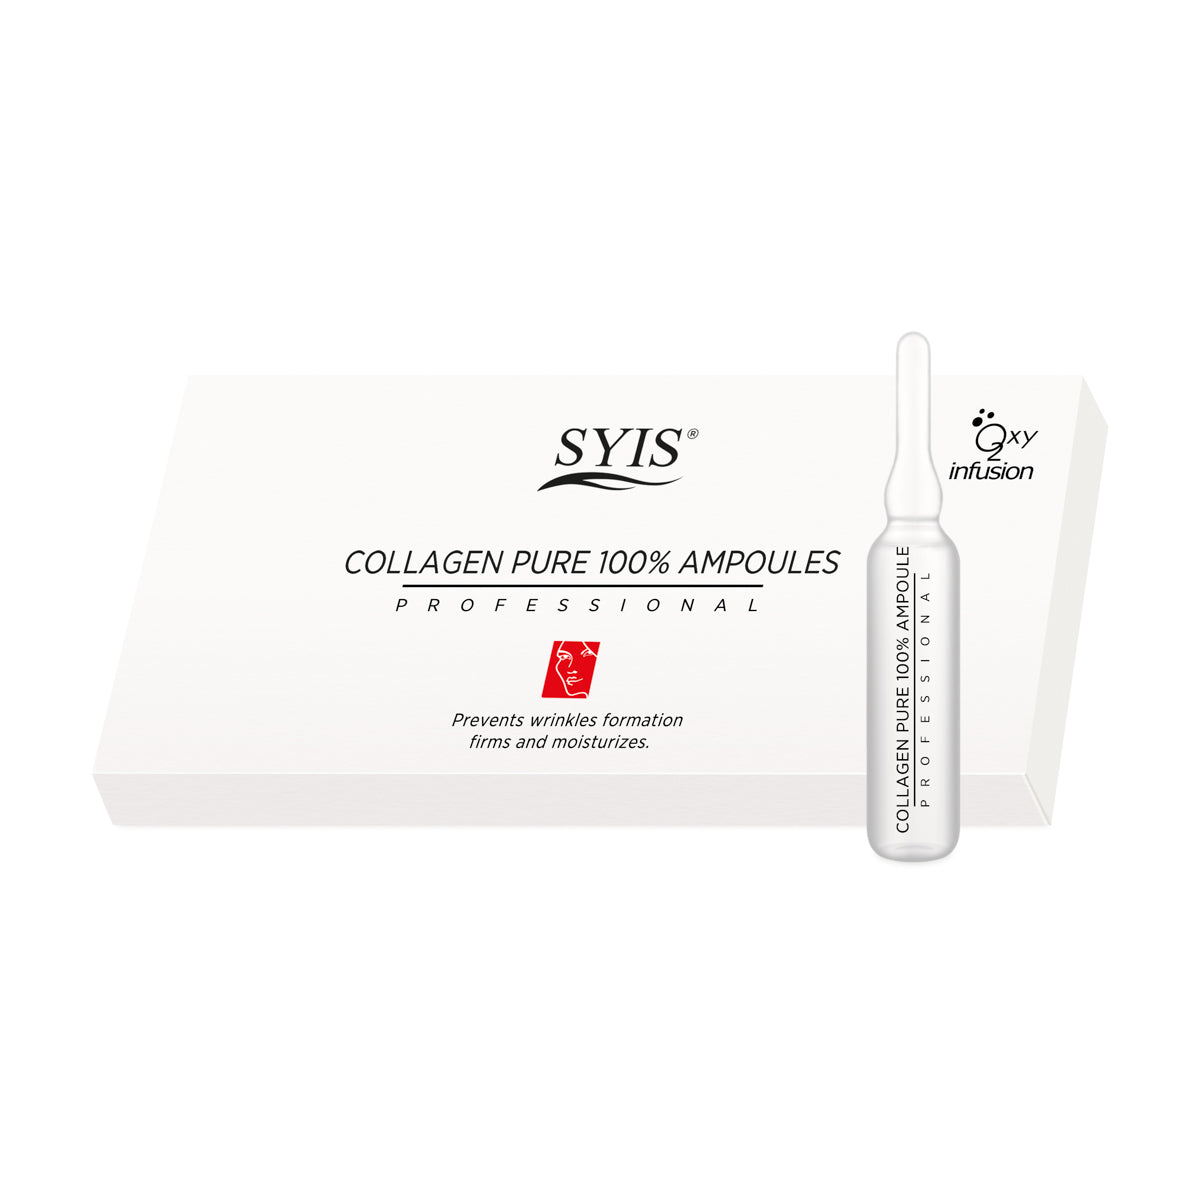 Syis pure collagen ampoules 100% 10x3 ml